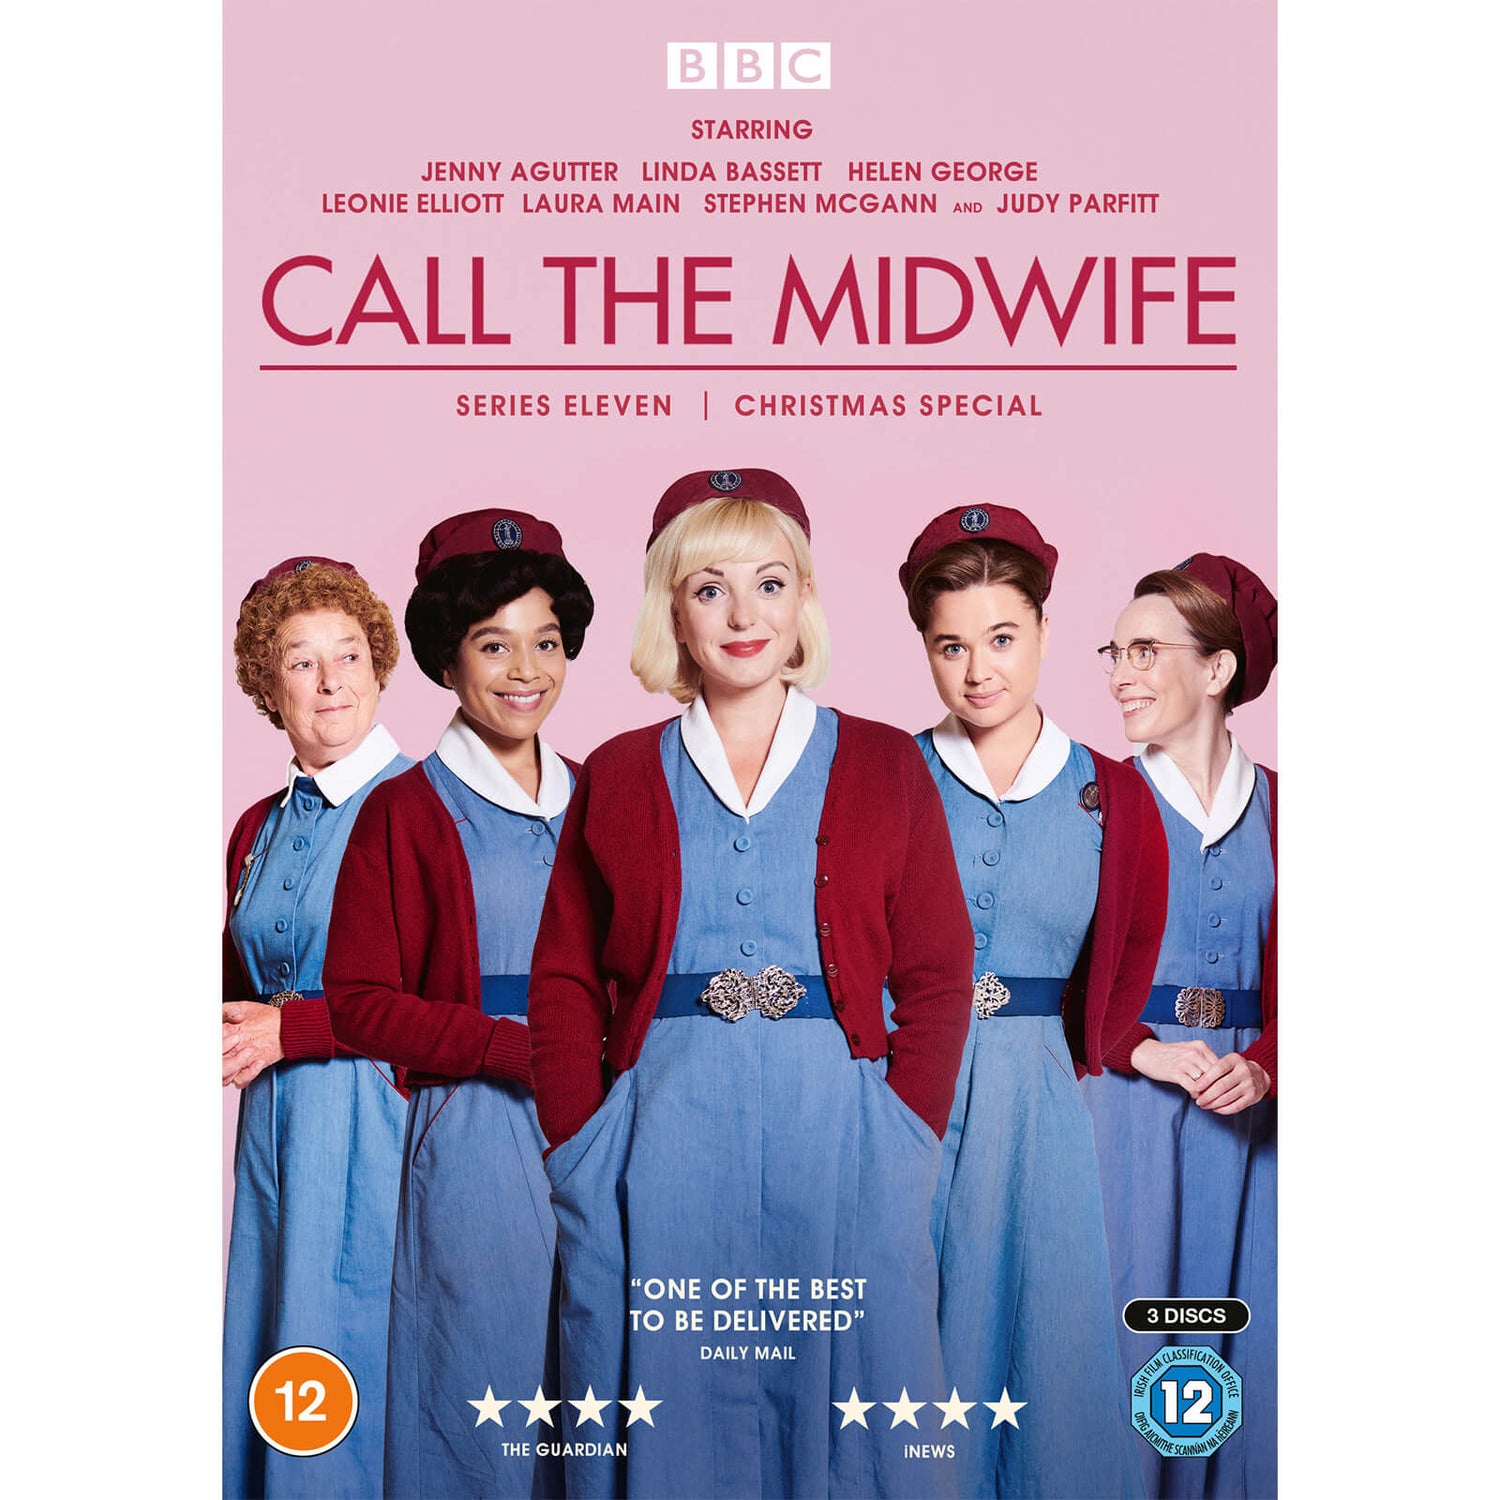 Call the Midwife - Series 11